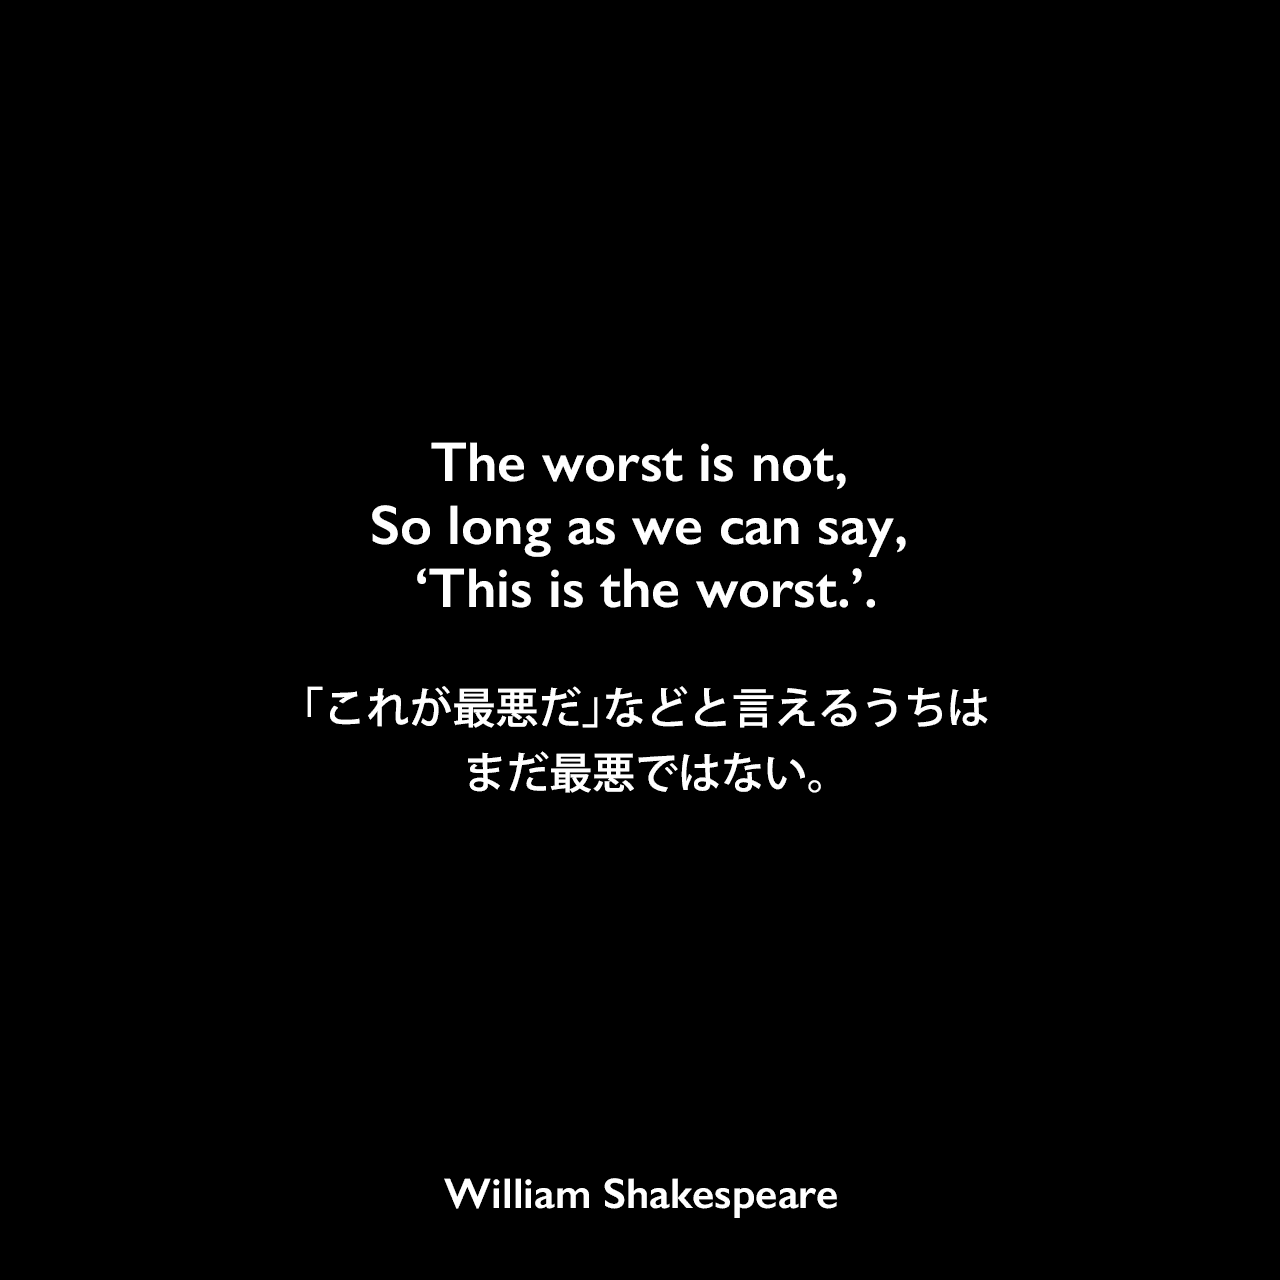 The worst is not, So long as we can say, ‘This is the worst.’.「これが最悪だ」などと言えるうちは、まだ最悪ではない。William Shakespeare